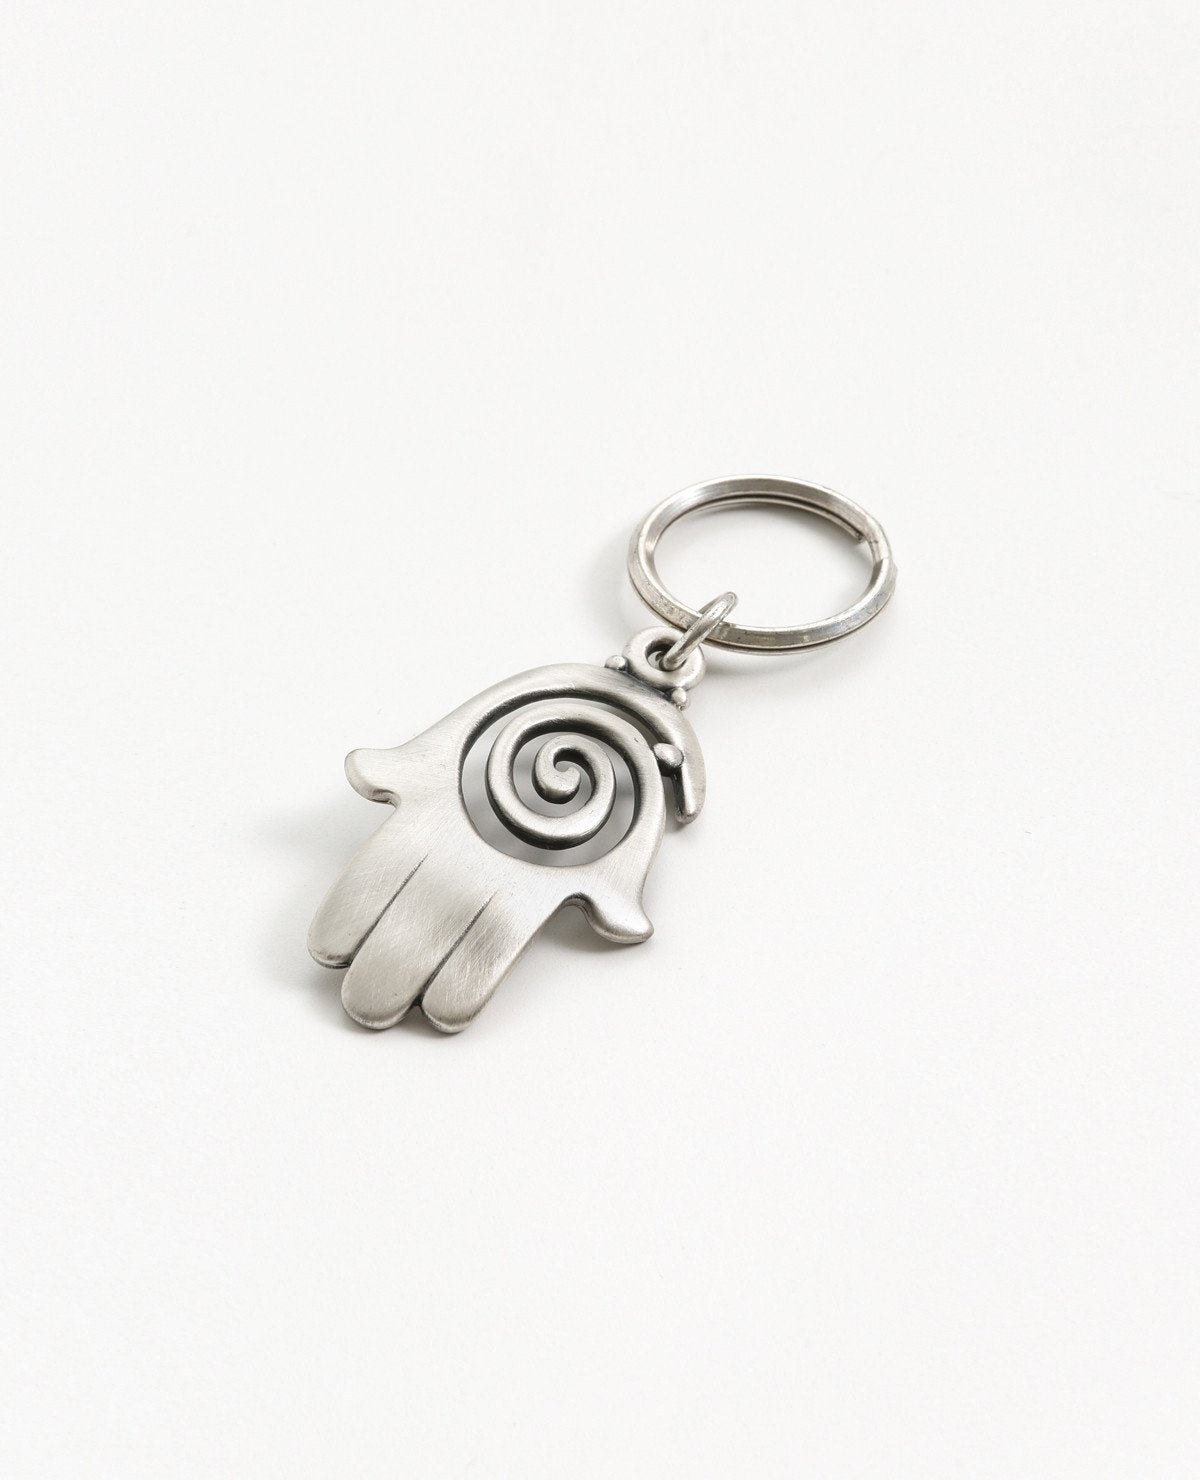 A charming and uniquely designed Hamsa shaped keychain which incorporates a full design with the empty spaces within the spiral. The Hamsa is coated in sterling silver and is slightly concave. It is so beautiful that you can just keep staring at it over and over, feel its different textures and sense the blessing within. A strong and reliable keychain that makes a great gift for your loved ones.  Length: 7 cm  Width: 4 cm